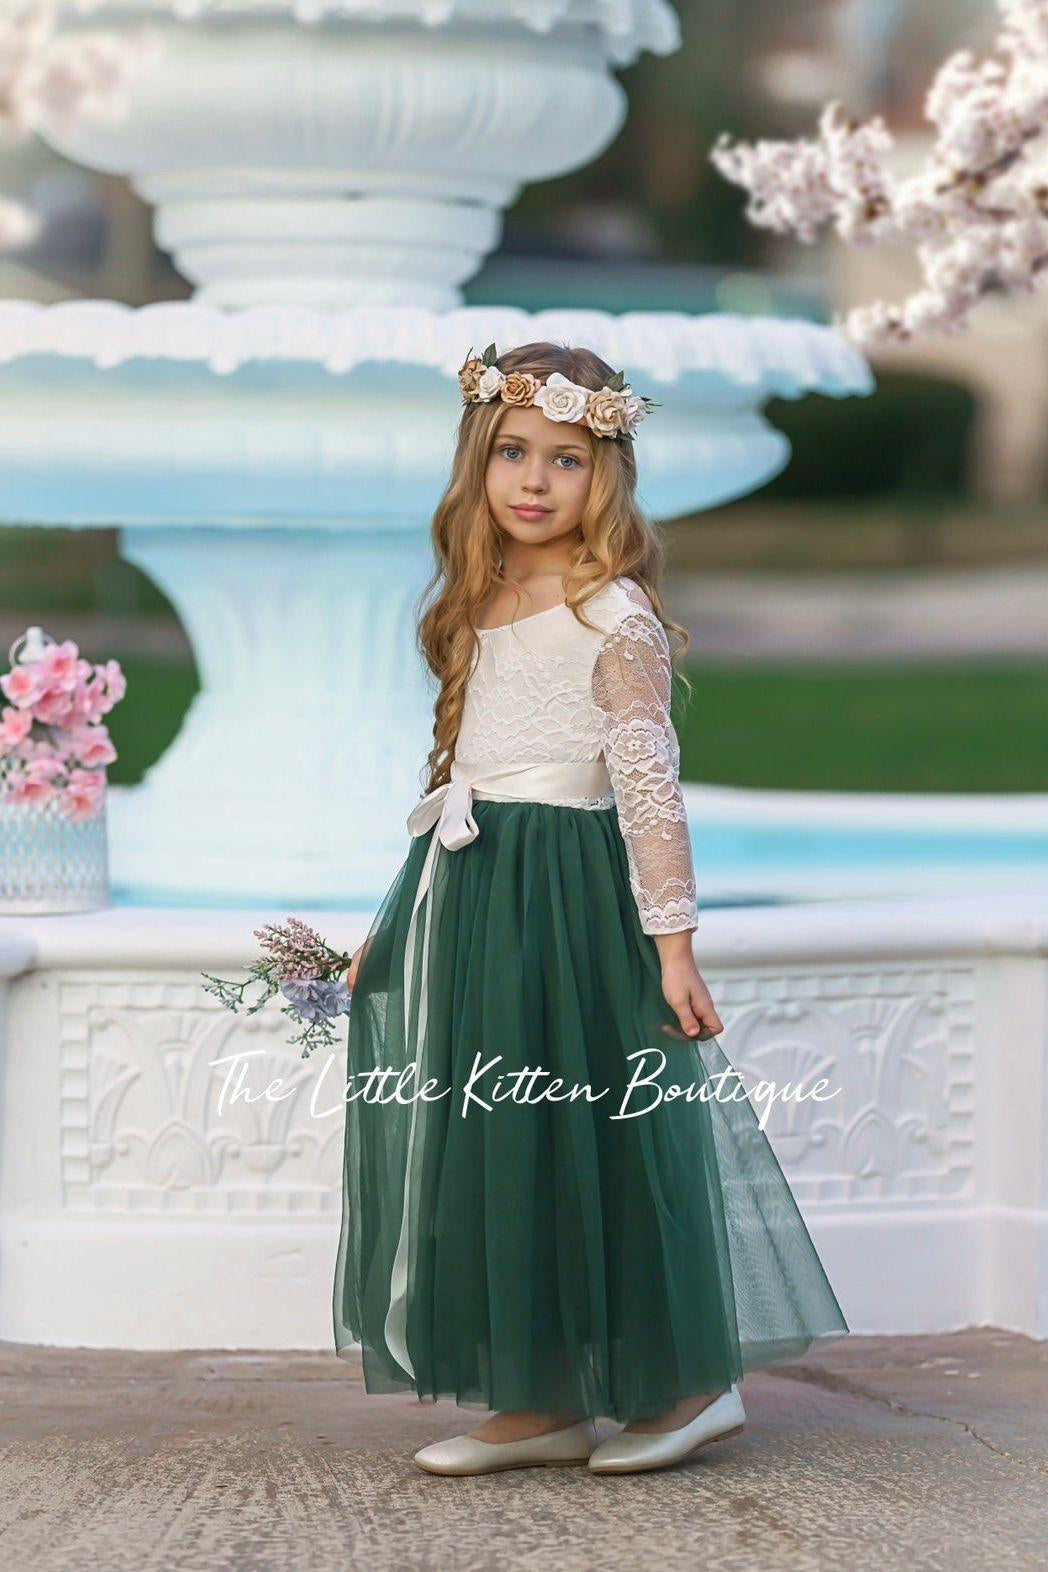 Long Sleeve Forest Green Flower Girl Dress for Weddings, Birthday Parties , Family Photo Shoots and More - The Little Kitten Boutique